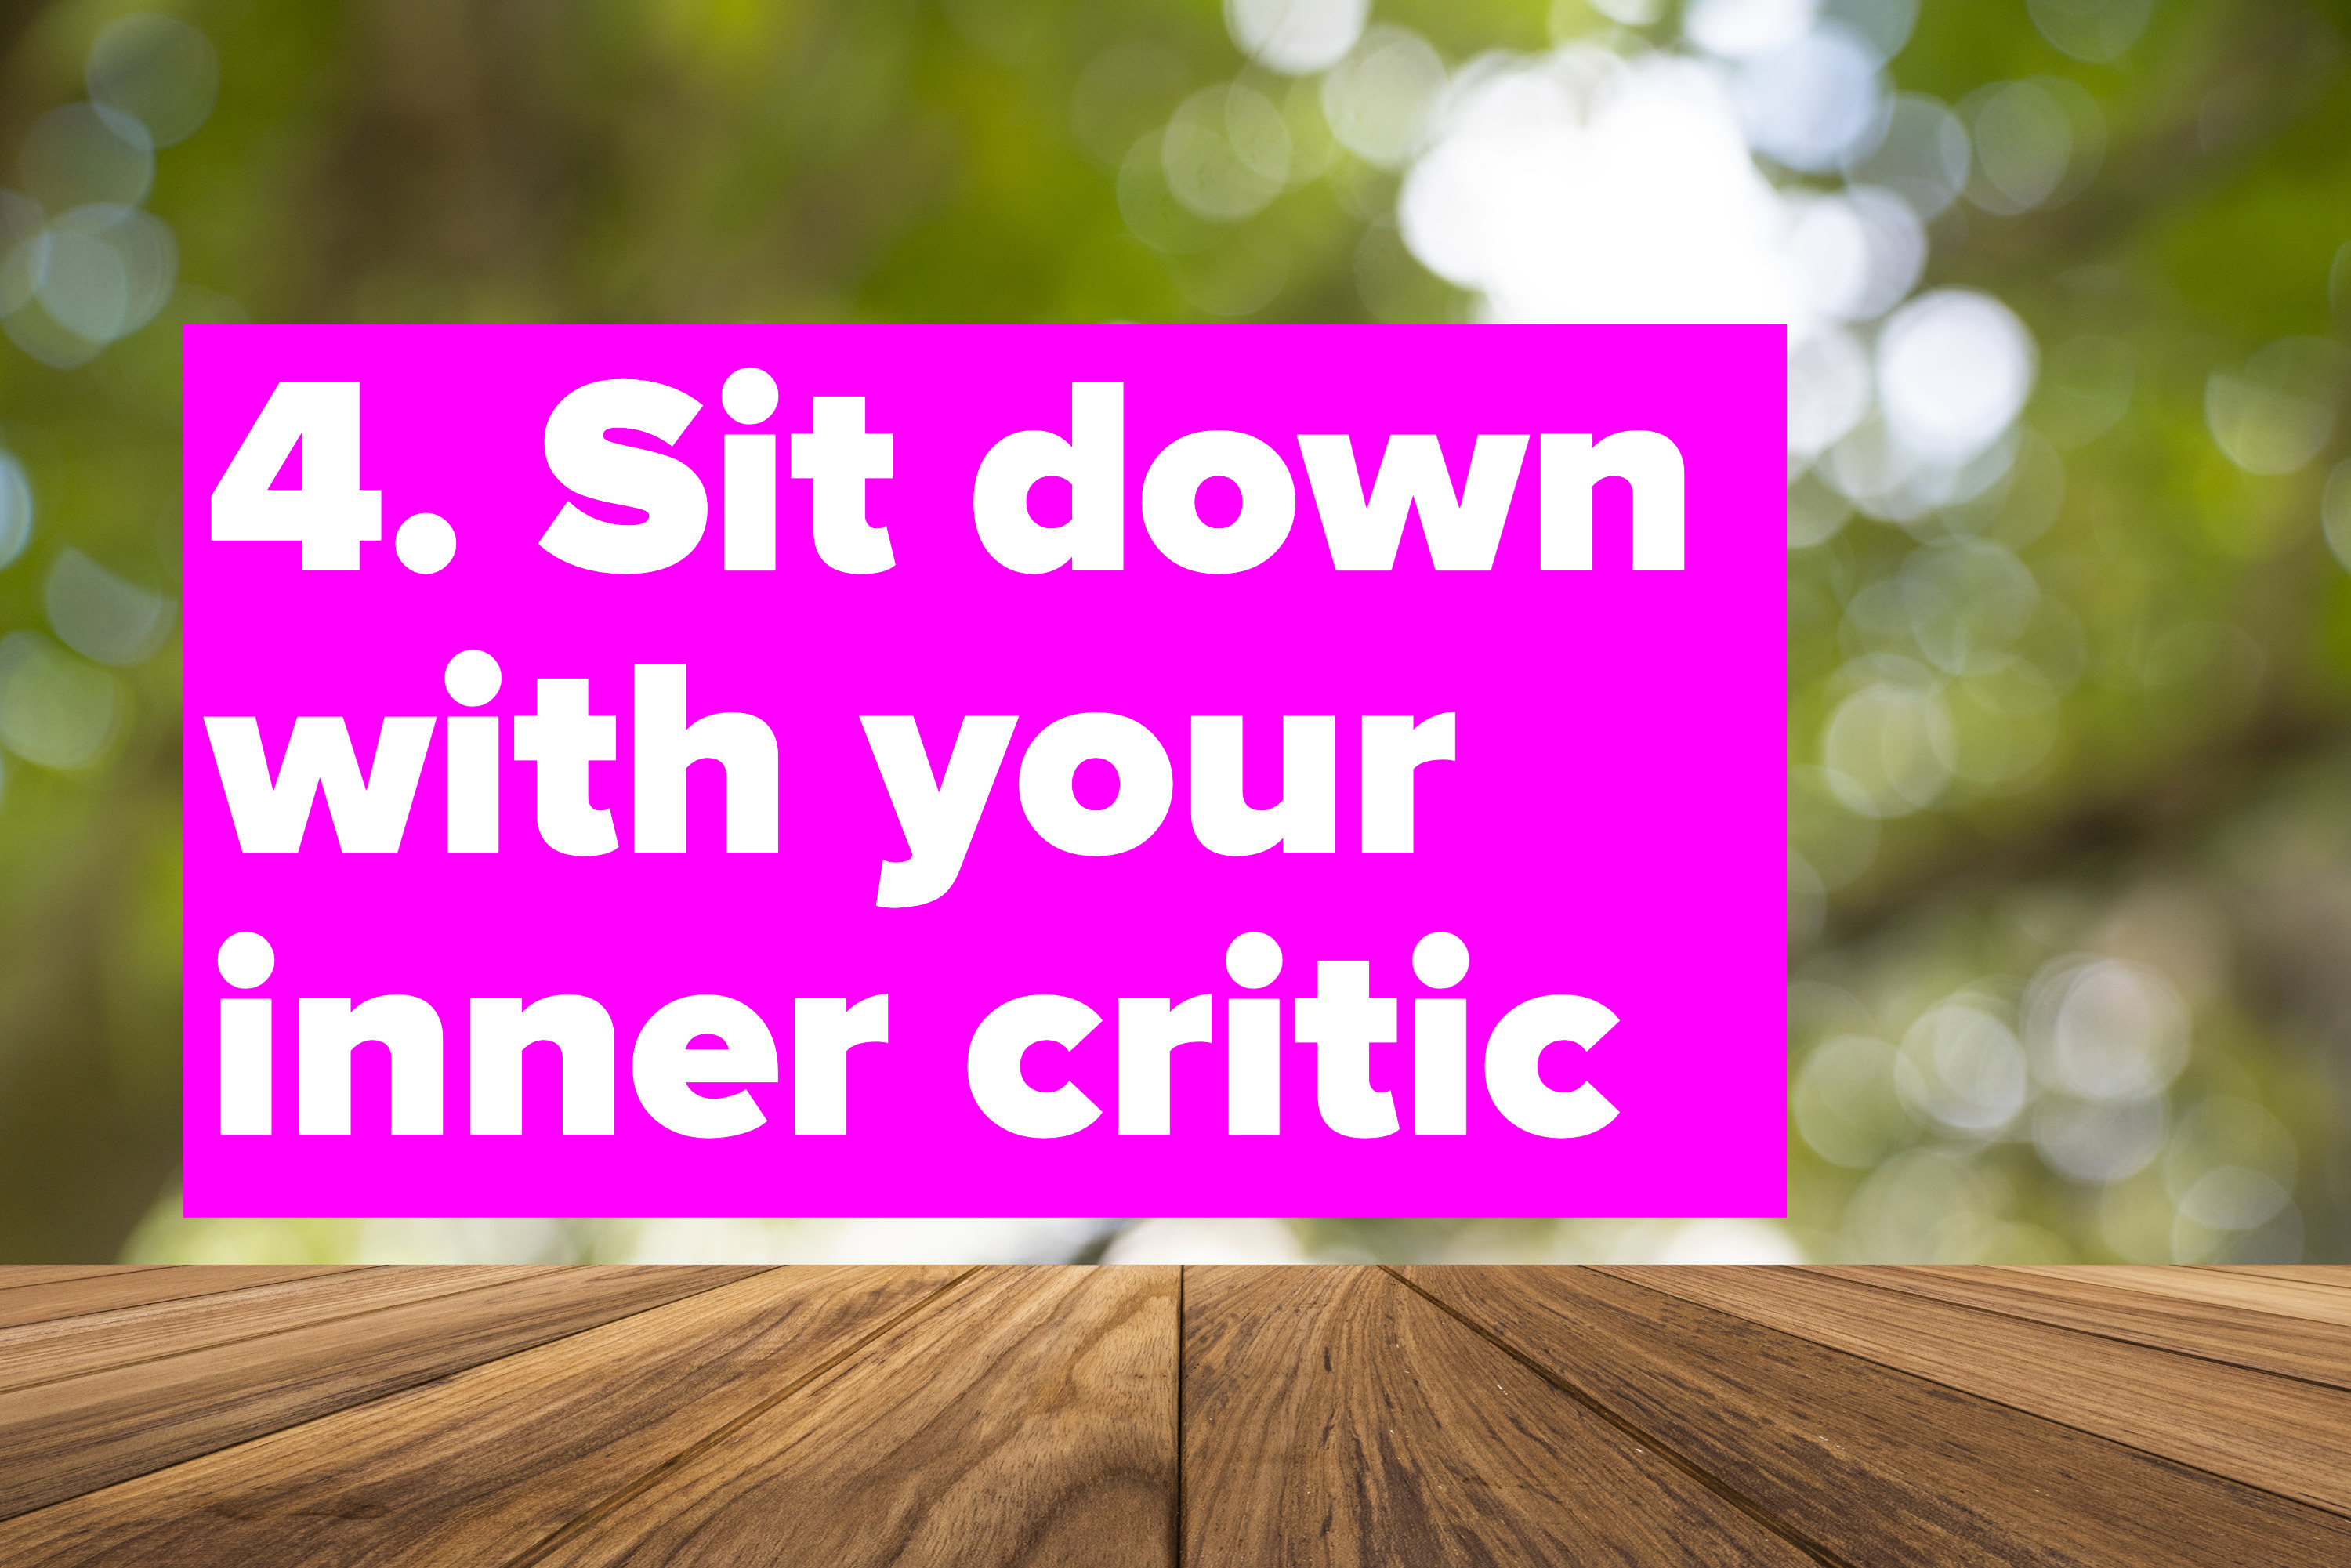 sit down with your inner critic